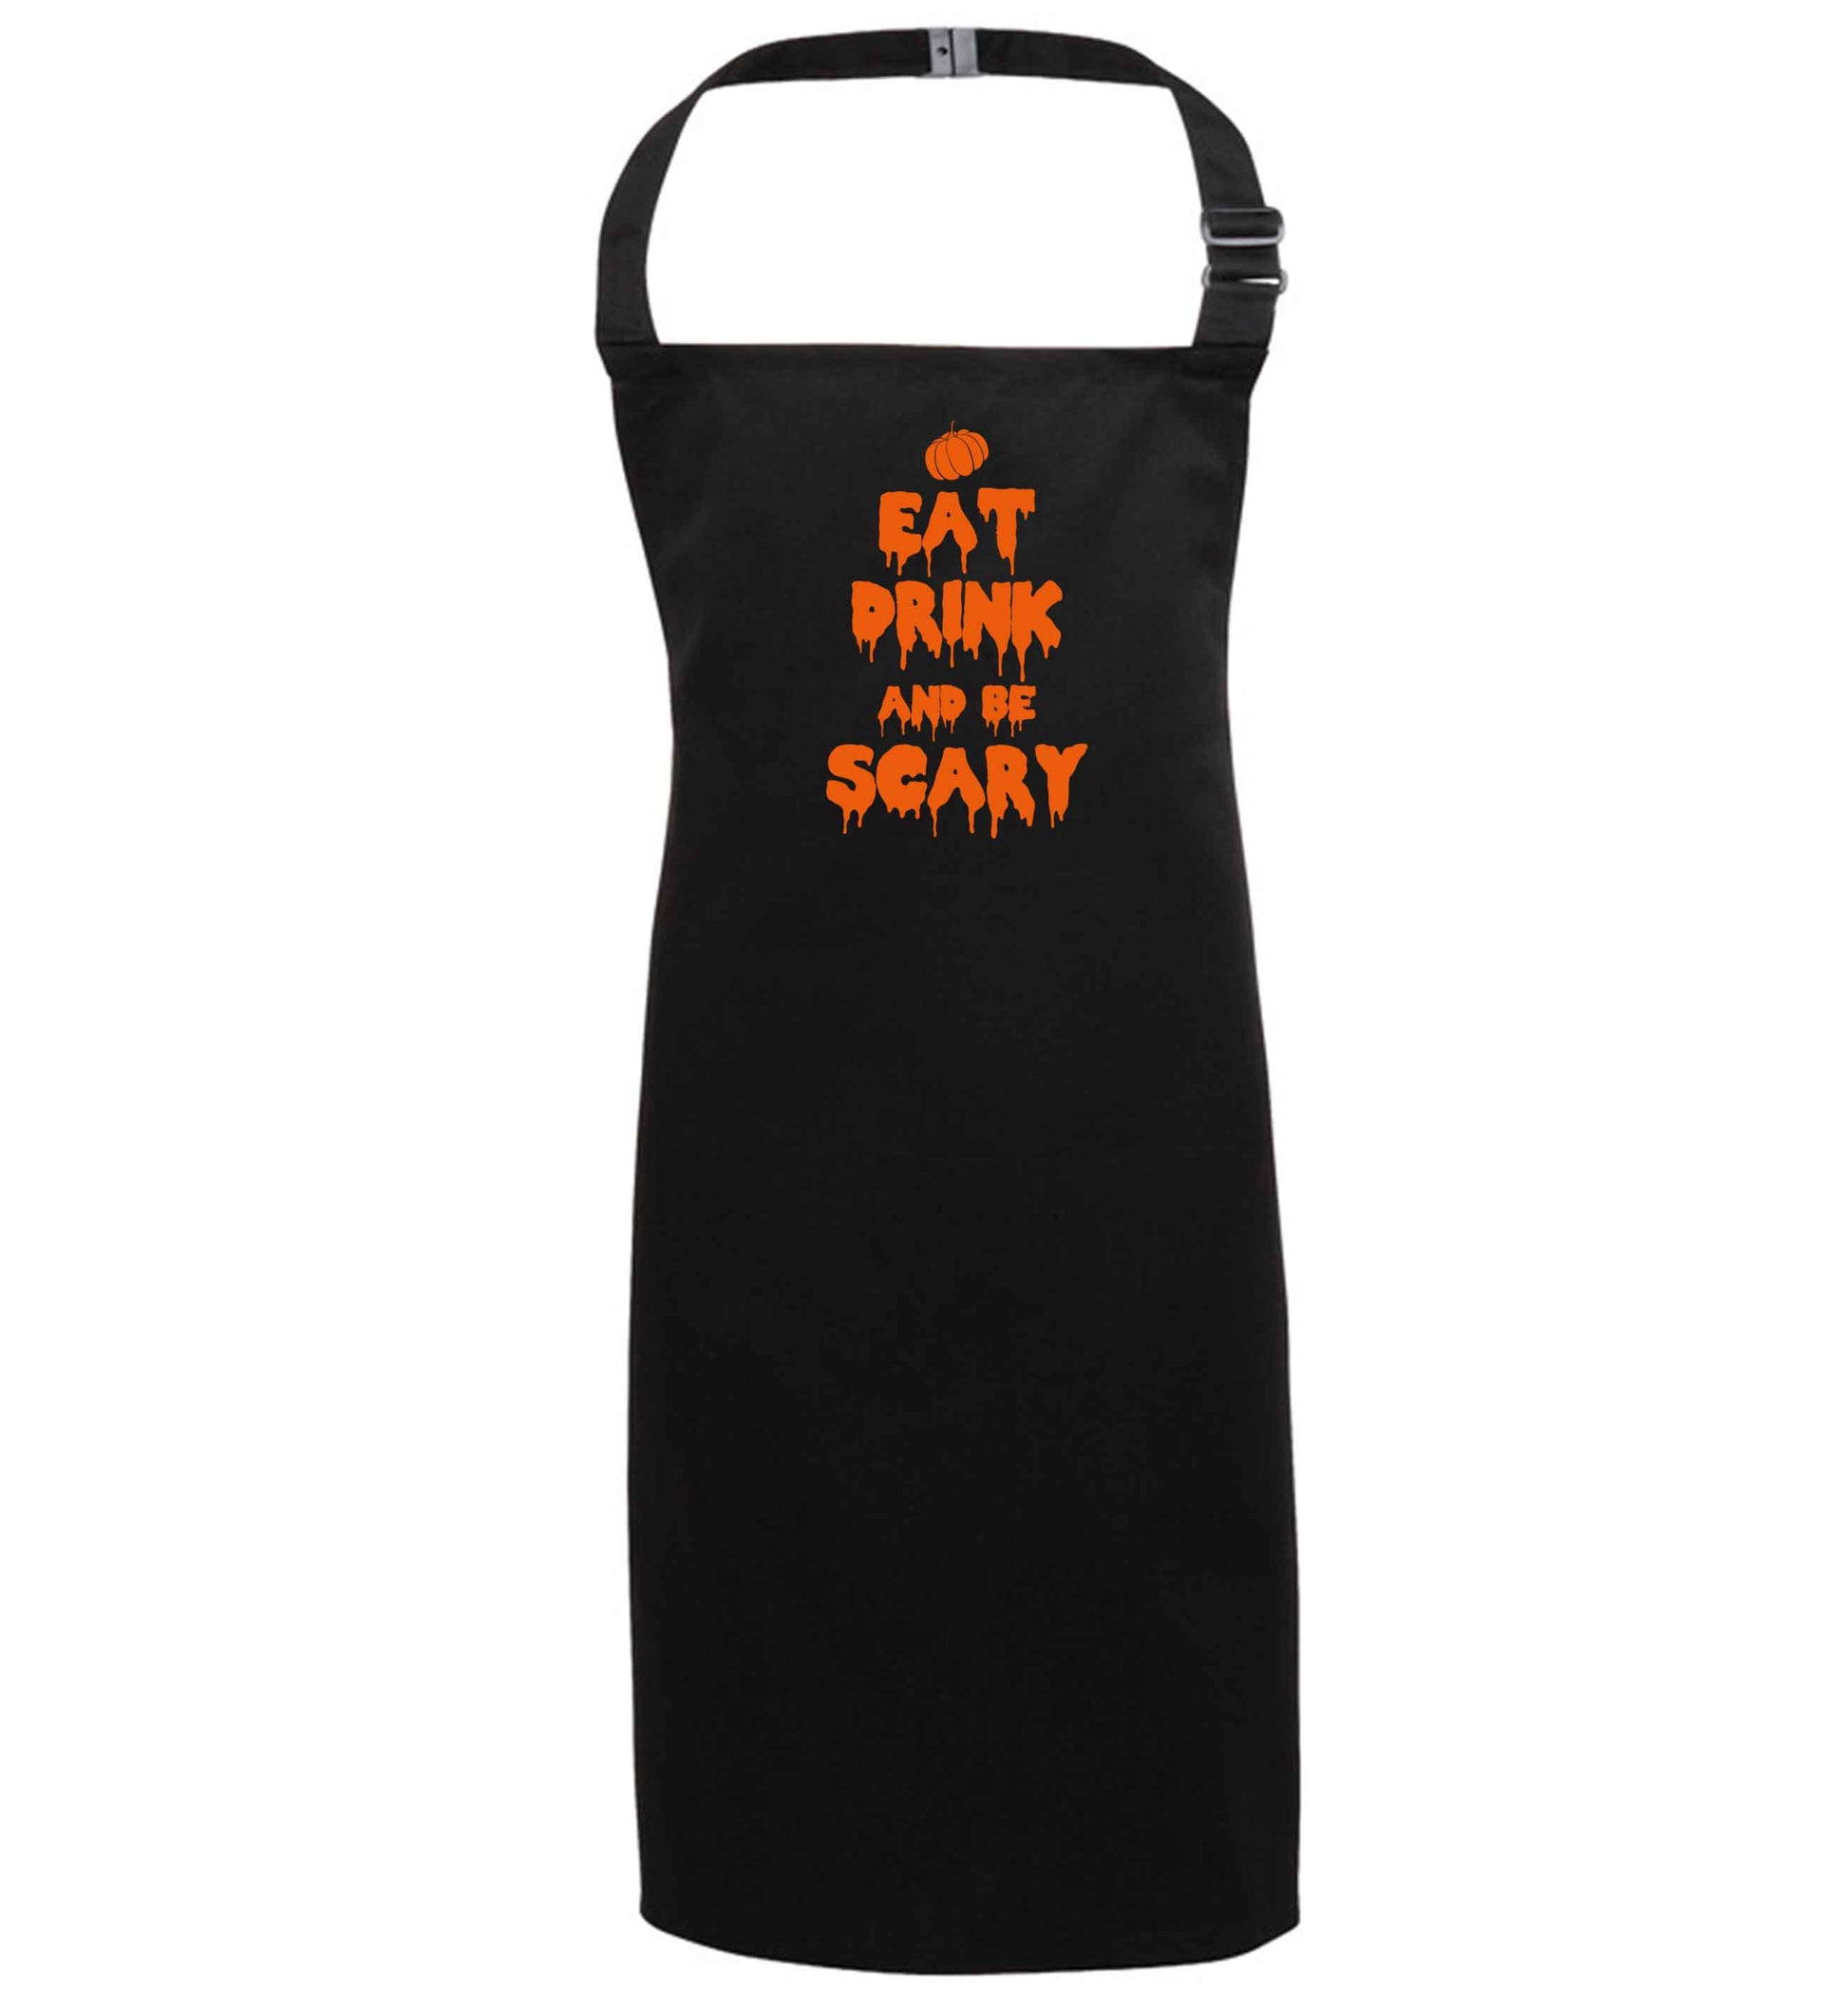 Eat drink and be scary black apron 7-10 years